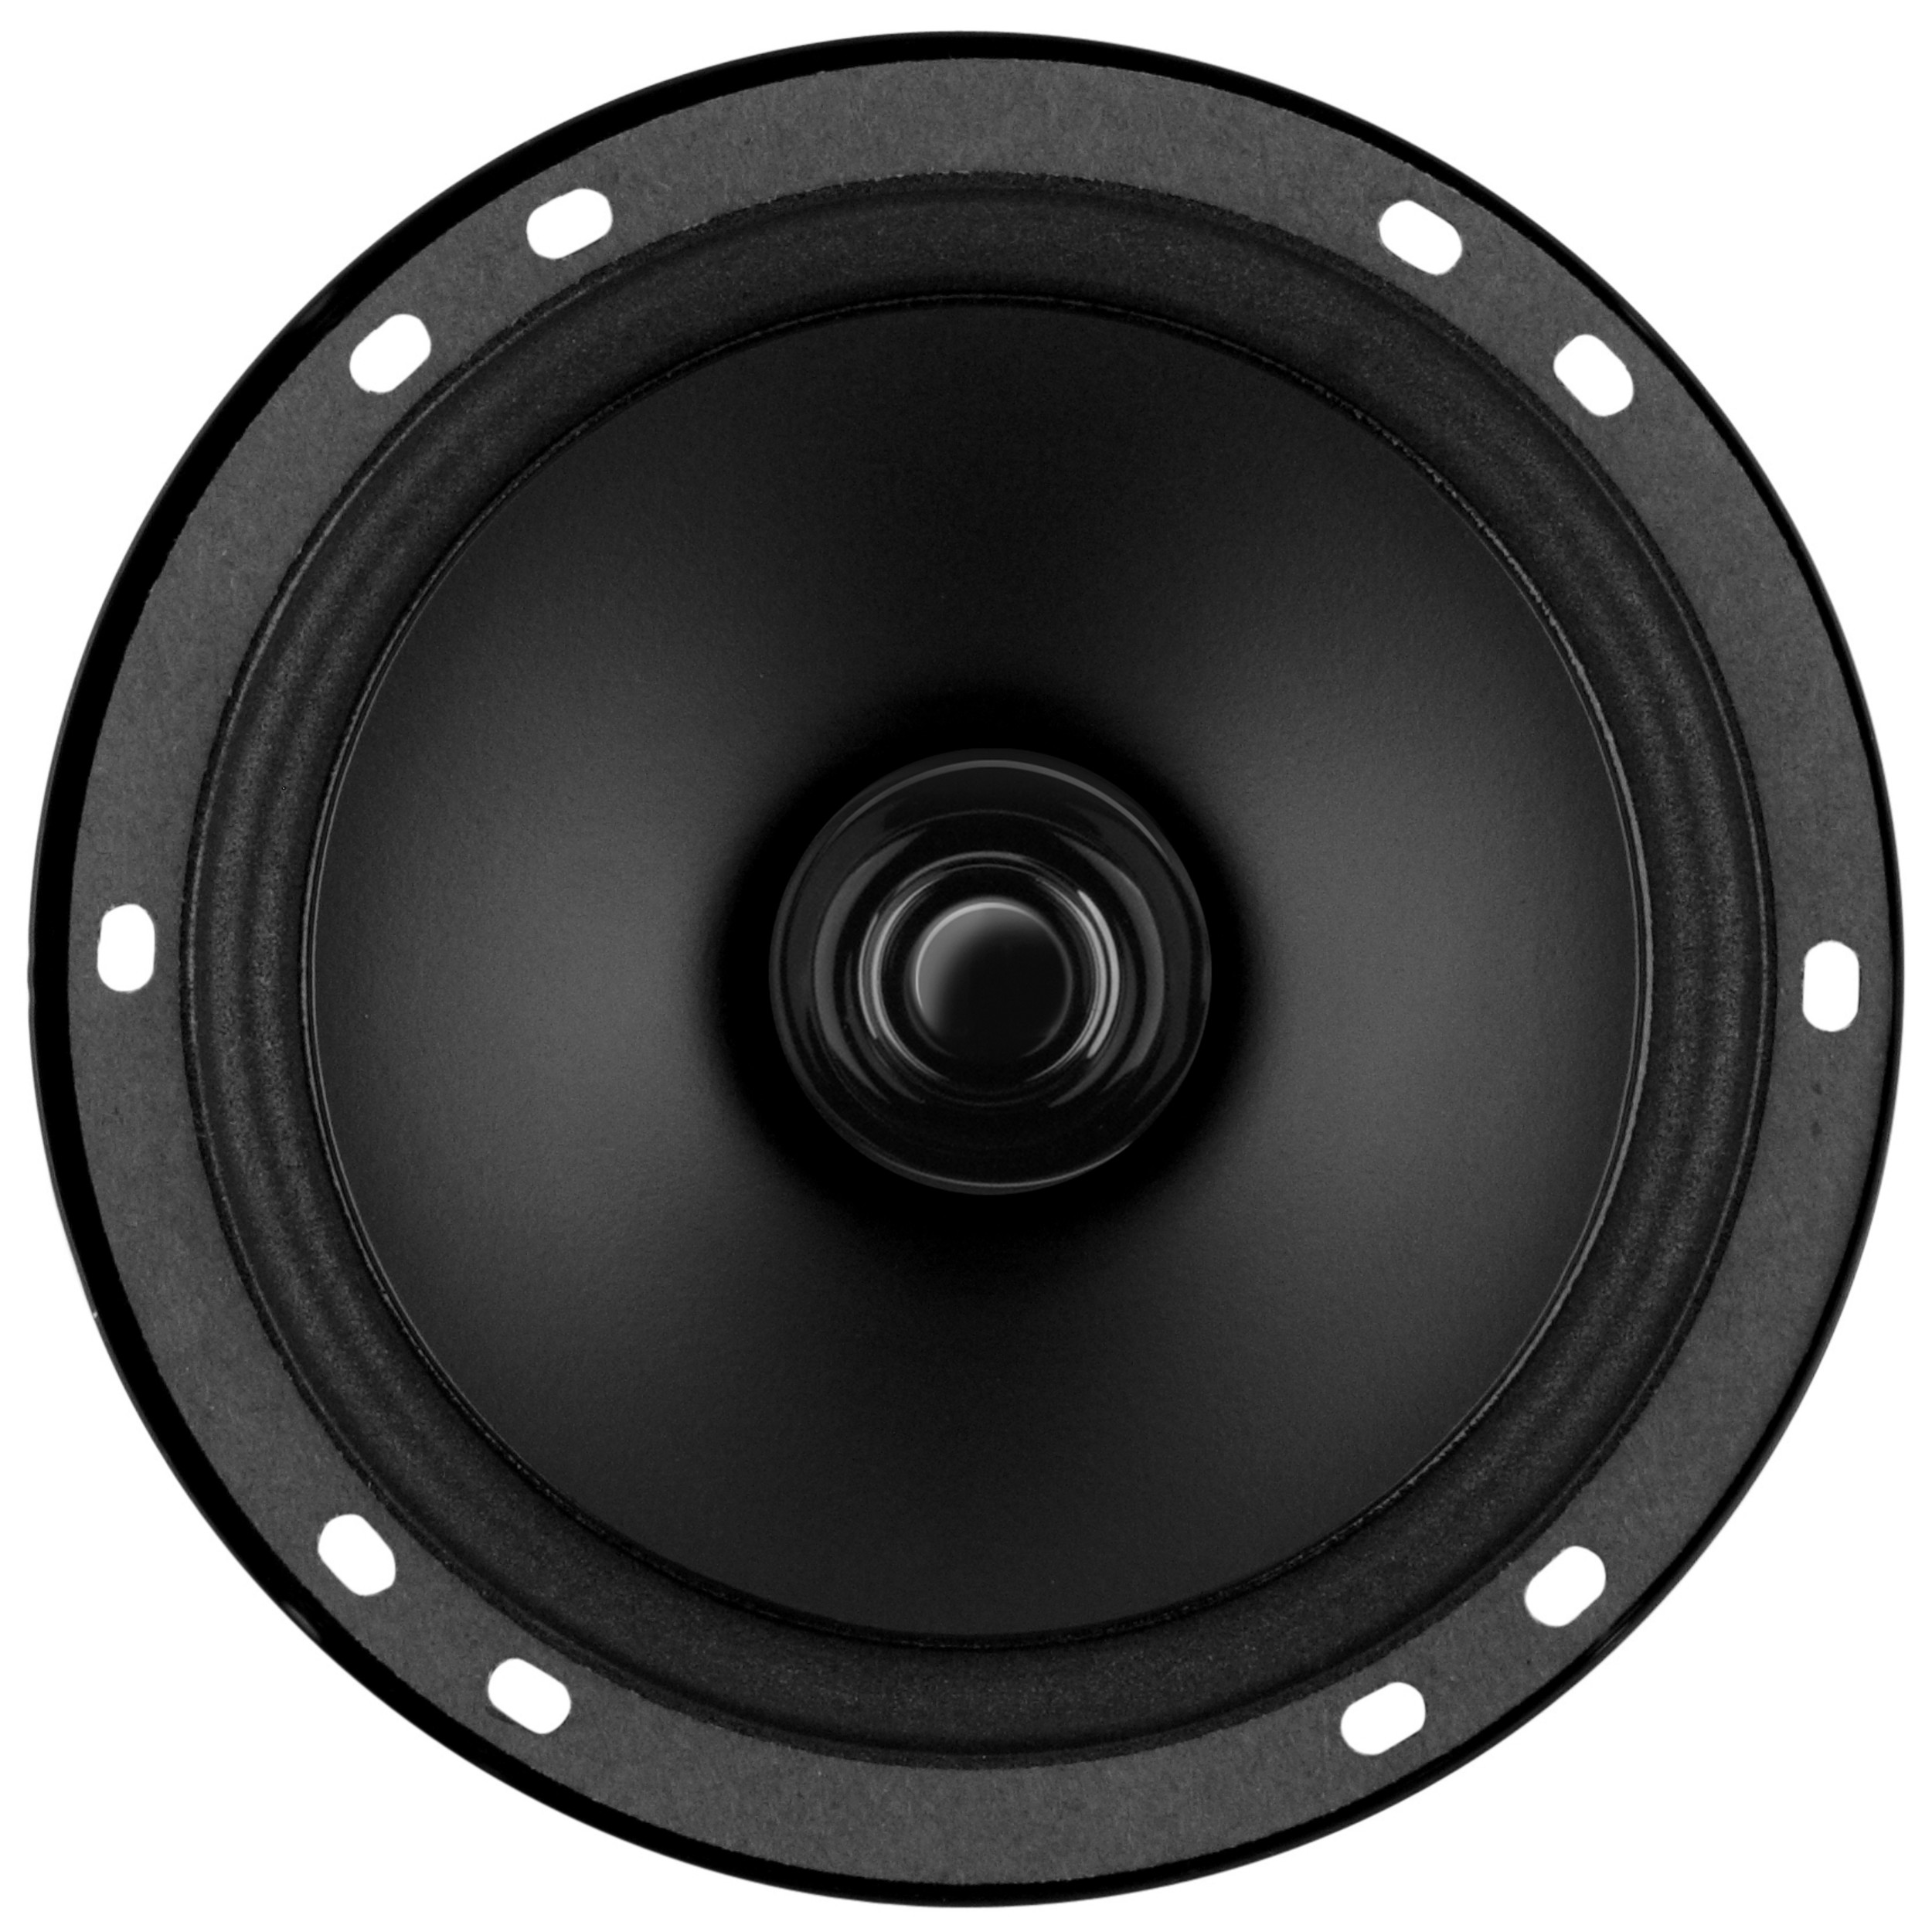 BOSS Audio Systems BRS65 6.5” Replacement Car Speaker, 80 Watts, Full Range - image 1 of 11